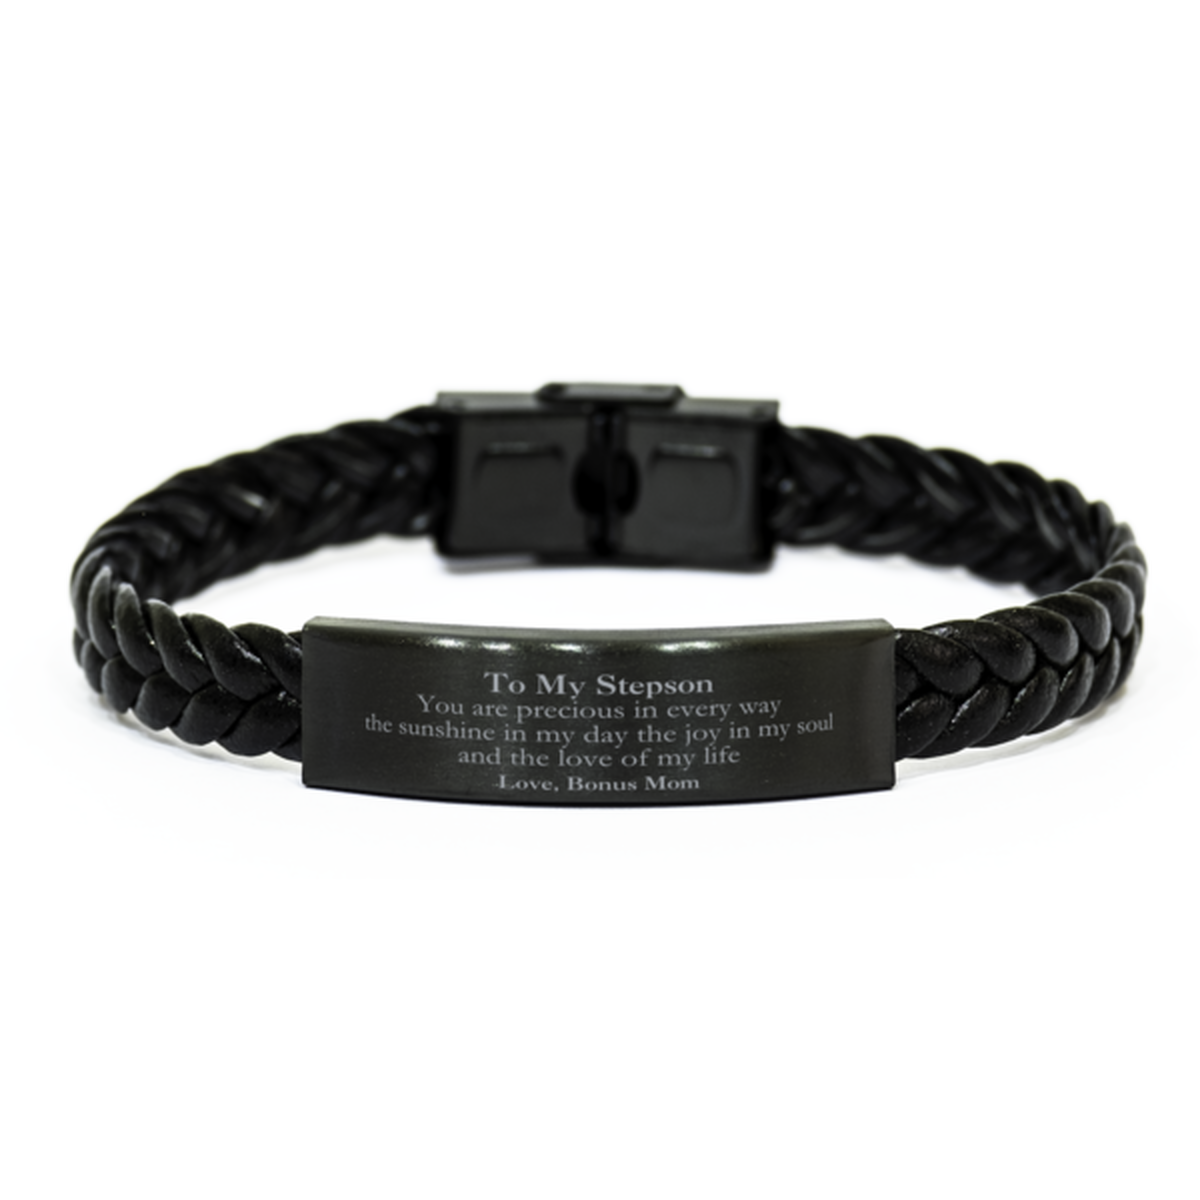 Graduation Gifts for Stepson Braided Leather Bracelet Present from Bonus Mom, Christmas Stepson Birthday Gifts Stepson You are precious in every way the sunshine in my day. Love, Bonus Mom